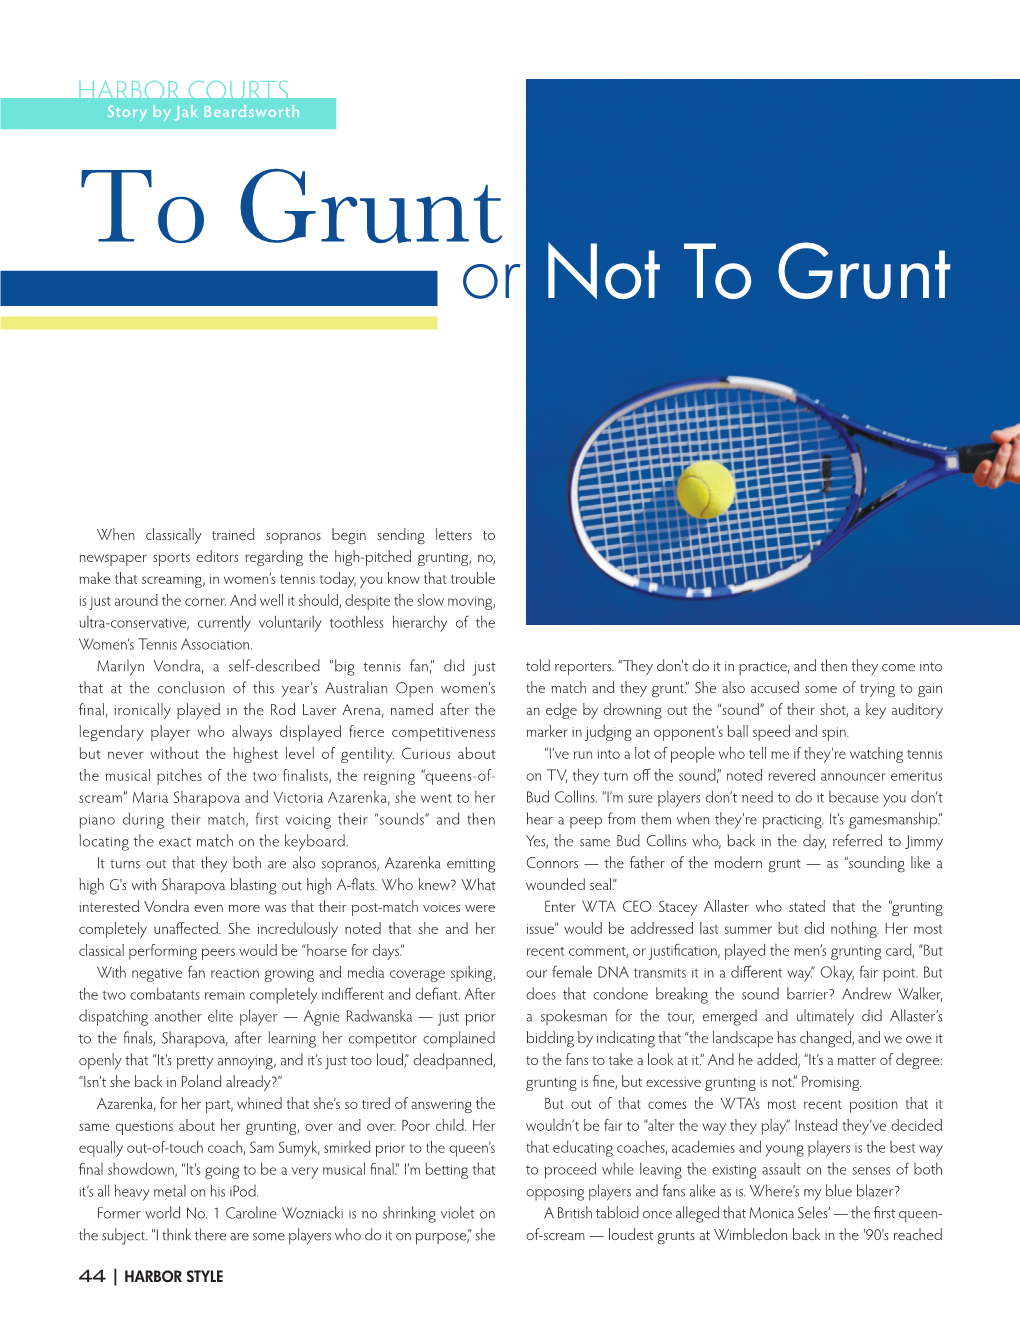 To Grunt Or Not to Grunt